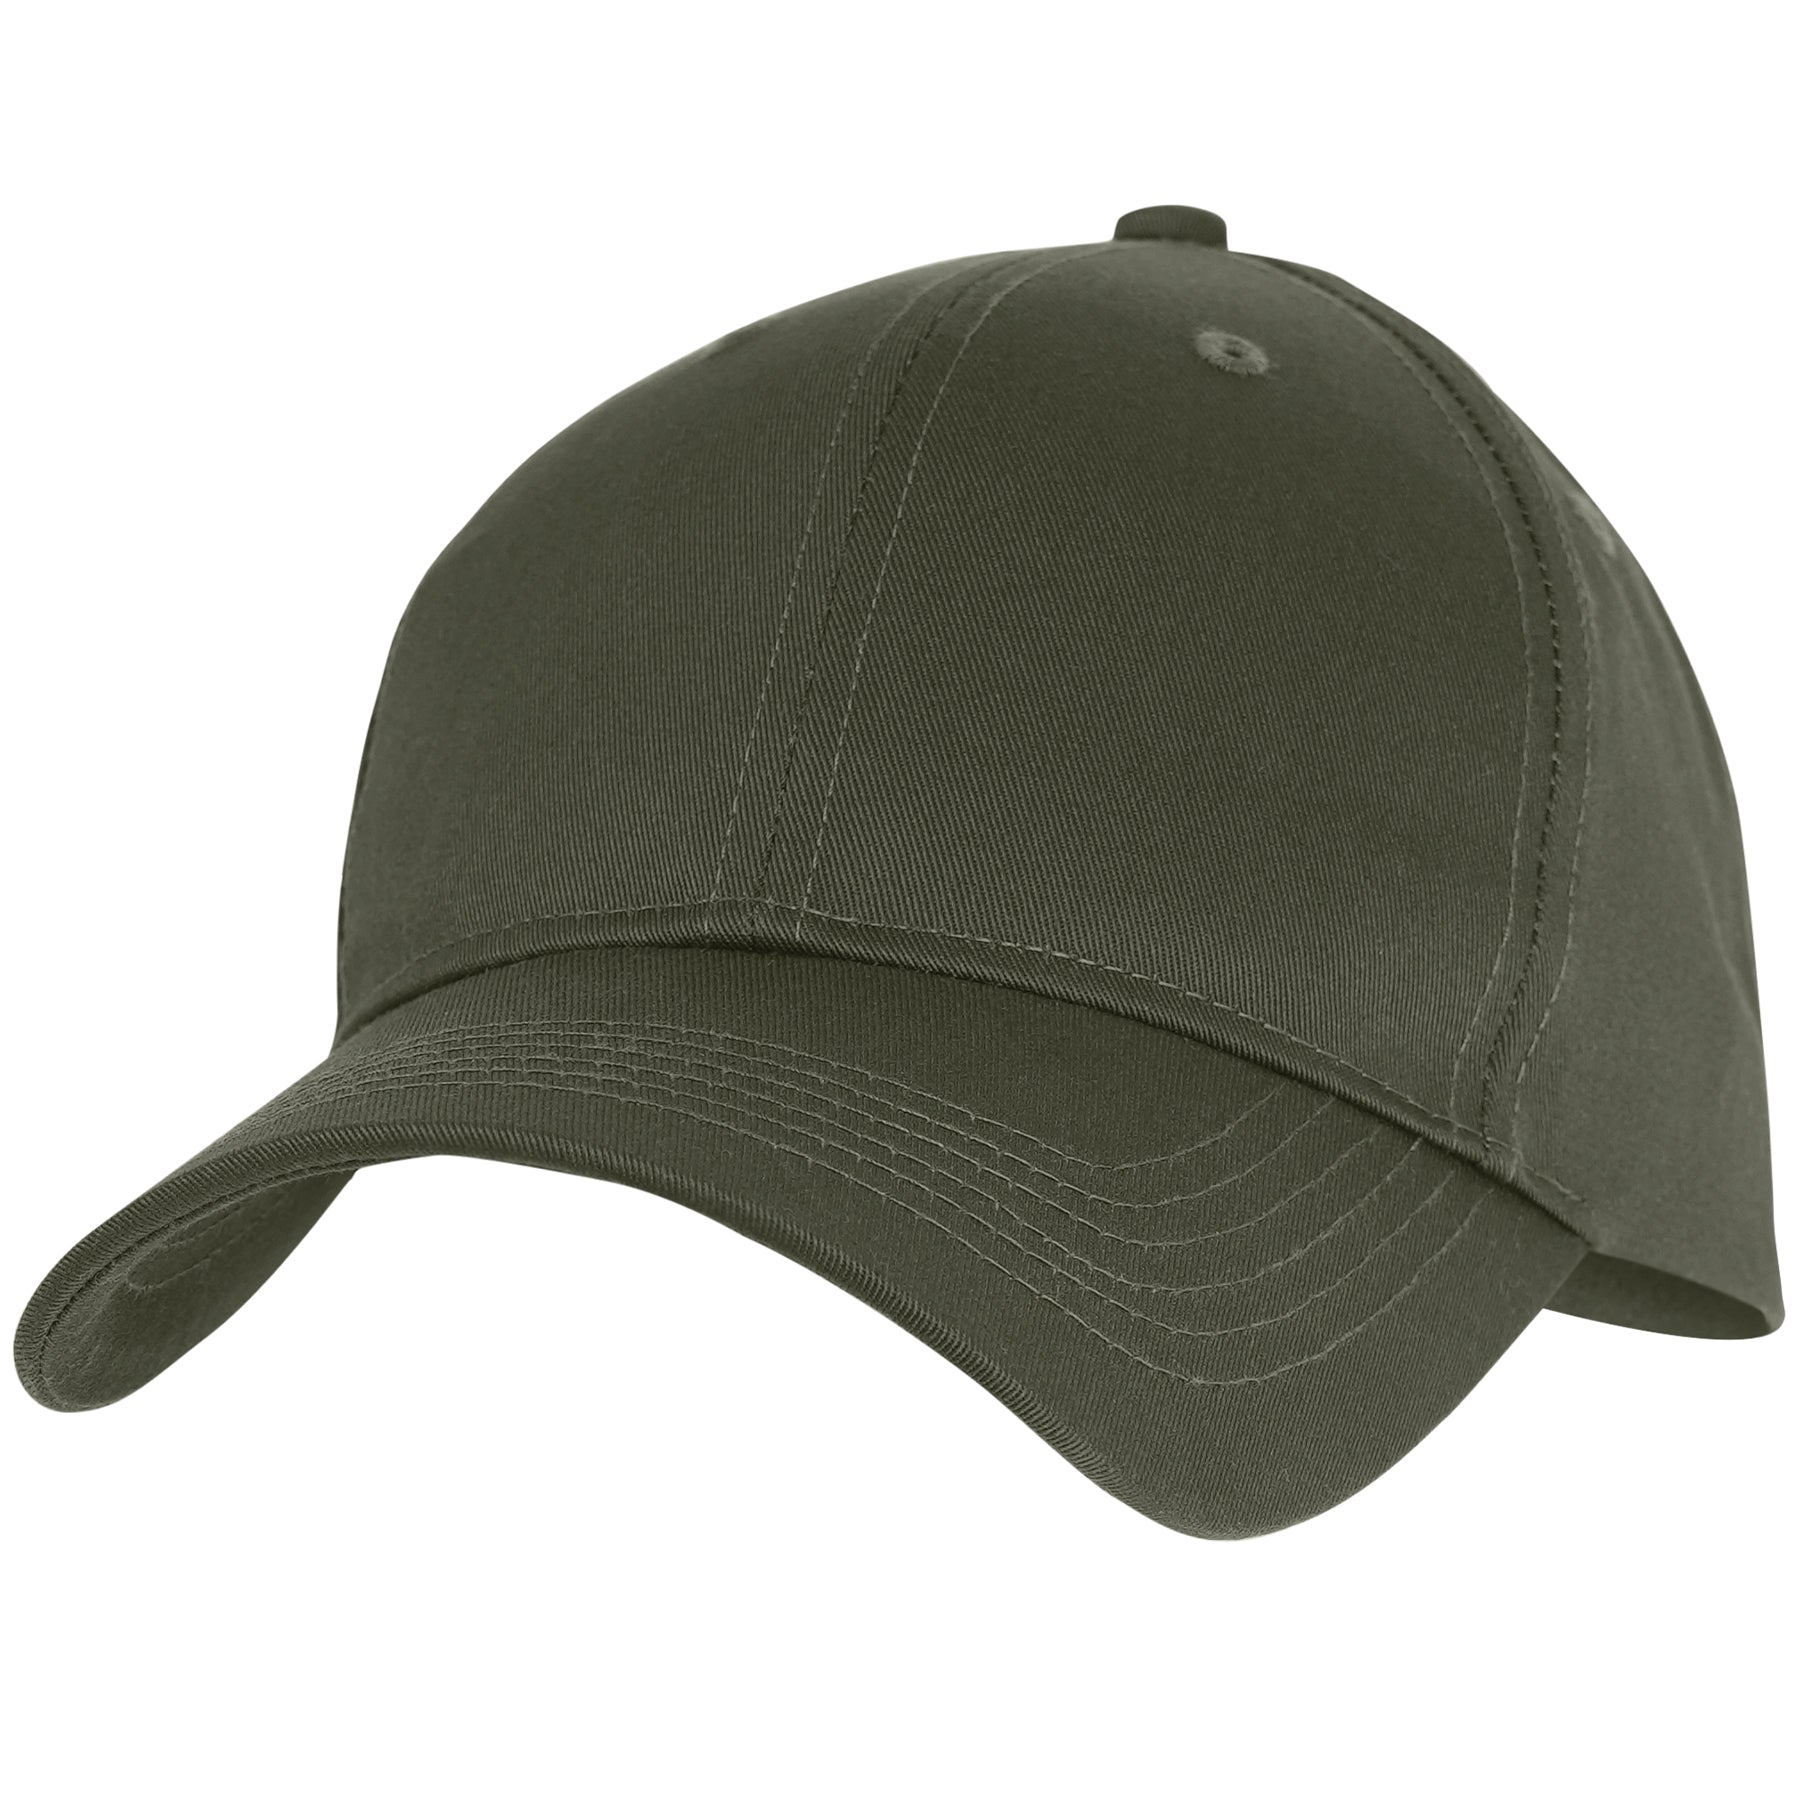 Rothco Supreme Solid Color Low Profile Cap - New Colors!